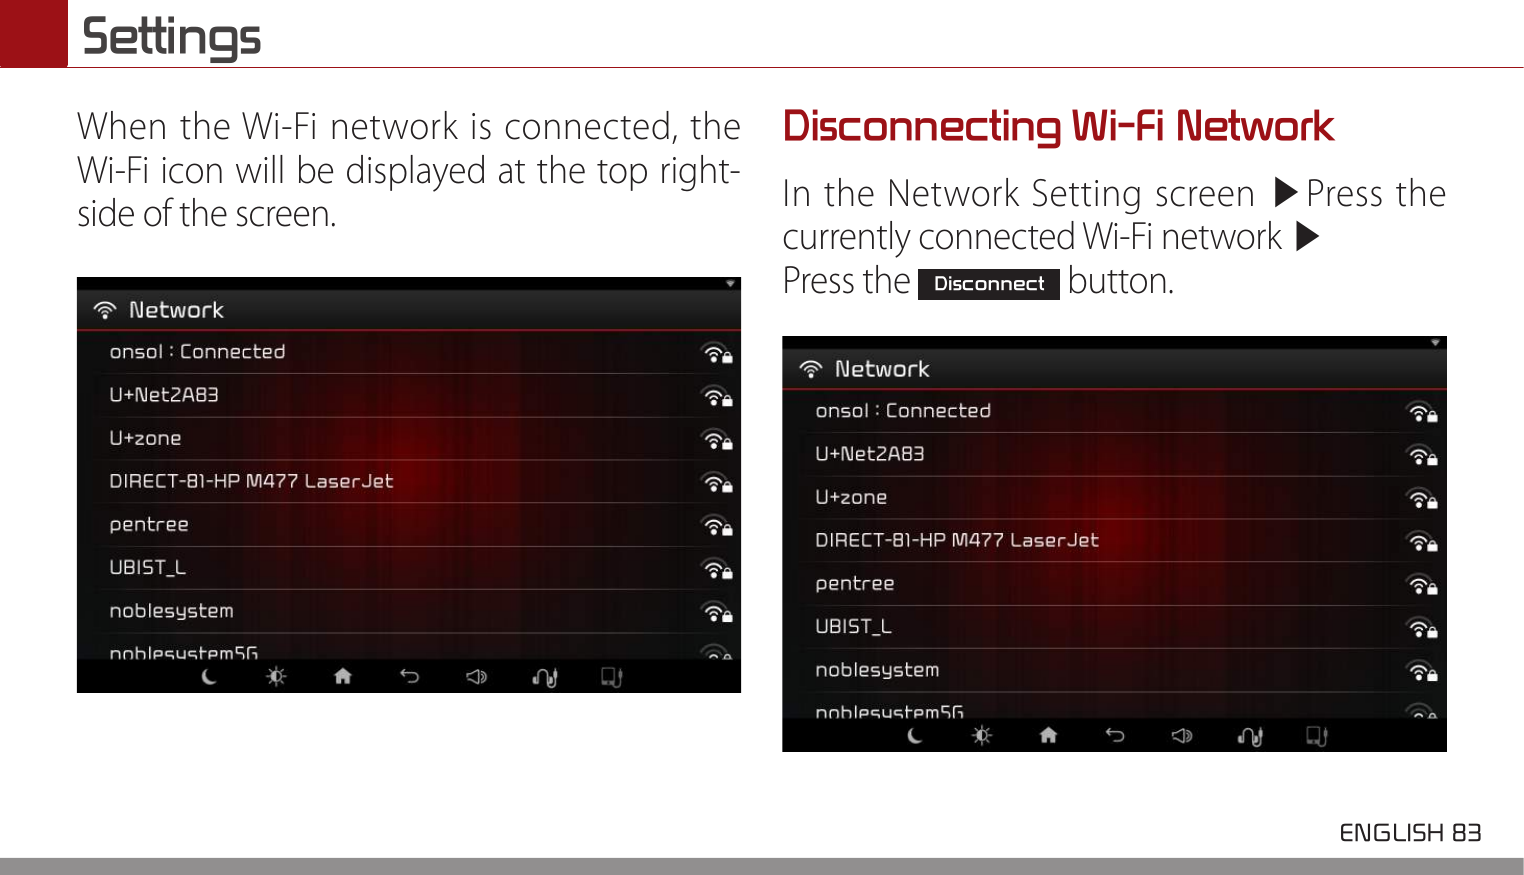  ENGLISH 83 SettingsWhen the Wi-Fi network is connected, the Wi-Fi icon will be displayed at the top right-side of the screen.Disconnecting Wi-Fi NetworkIn the Network Setting screen ▶Press the currently connected Wi-Fi network ▶ Press the Disconnect button.